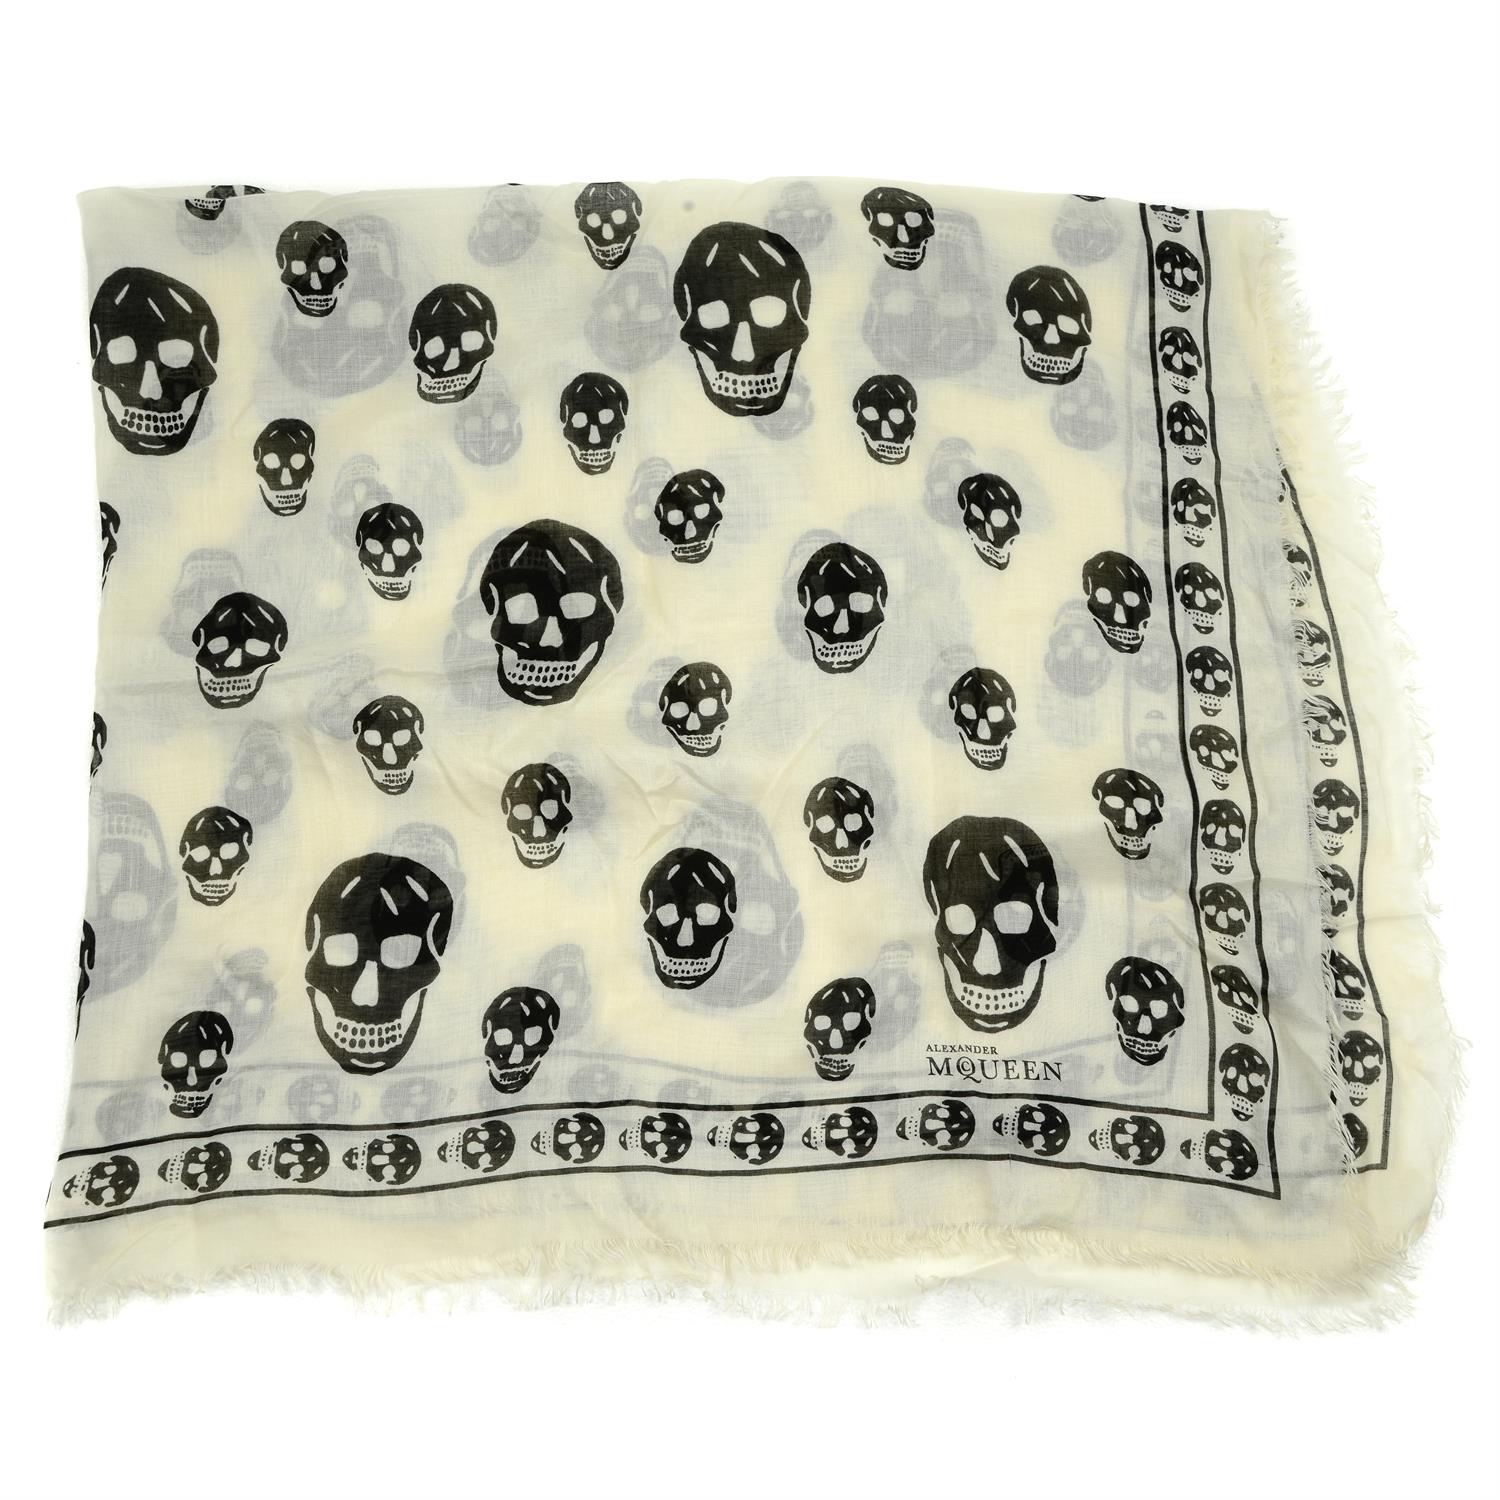 ALEXANDER MCQUEEN - a white and black skull scarf.